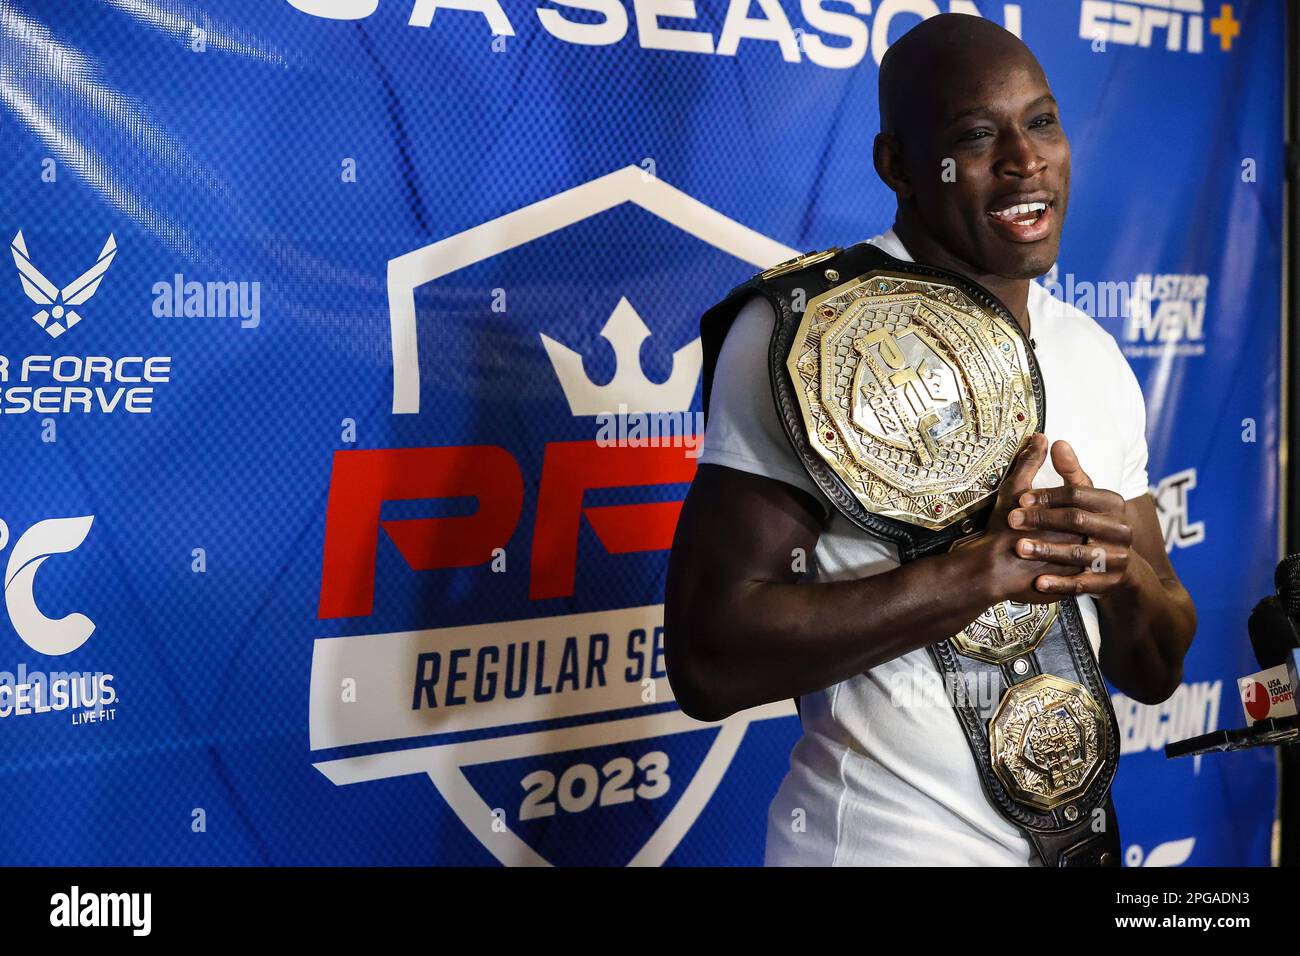 March 21, 2023: 2022 PFL Welterweight Champion Sadibou Sy speaks to media  during the 2023 PFL Regular Season Media Day at Xtreme Couture MMA in Las  Vegas, NV. Christopher Trim/CSM Stock Photo - Alamy